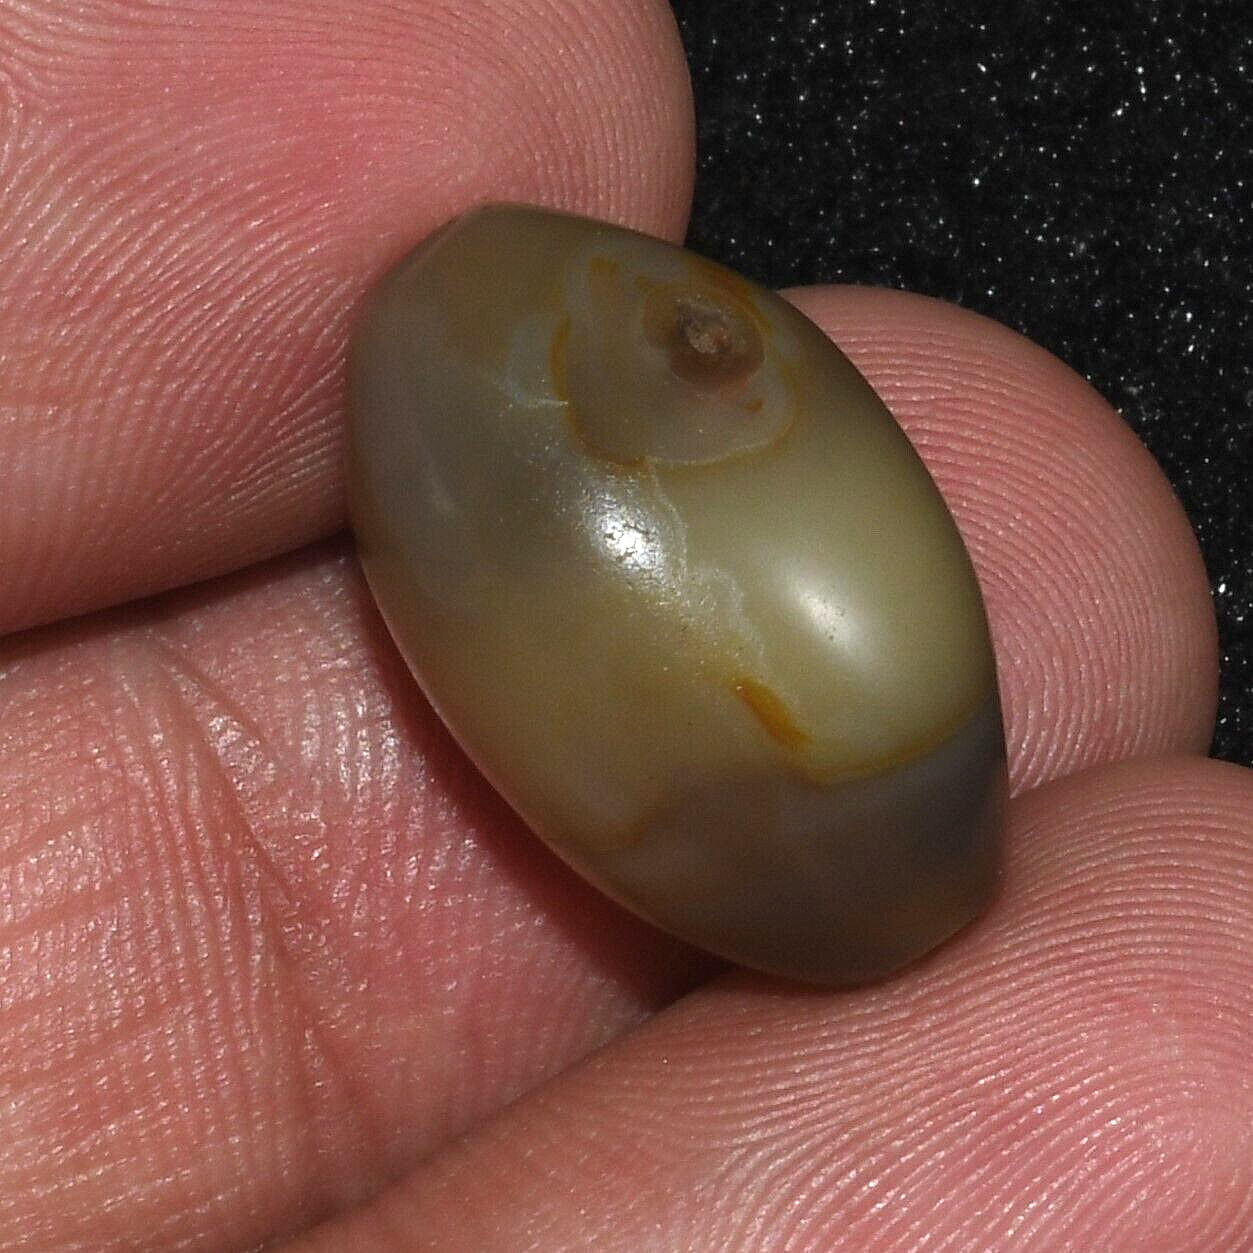 Genuine Big Ancient Tibetan Banded Agate Bead in Good Condition over 2000 Years